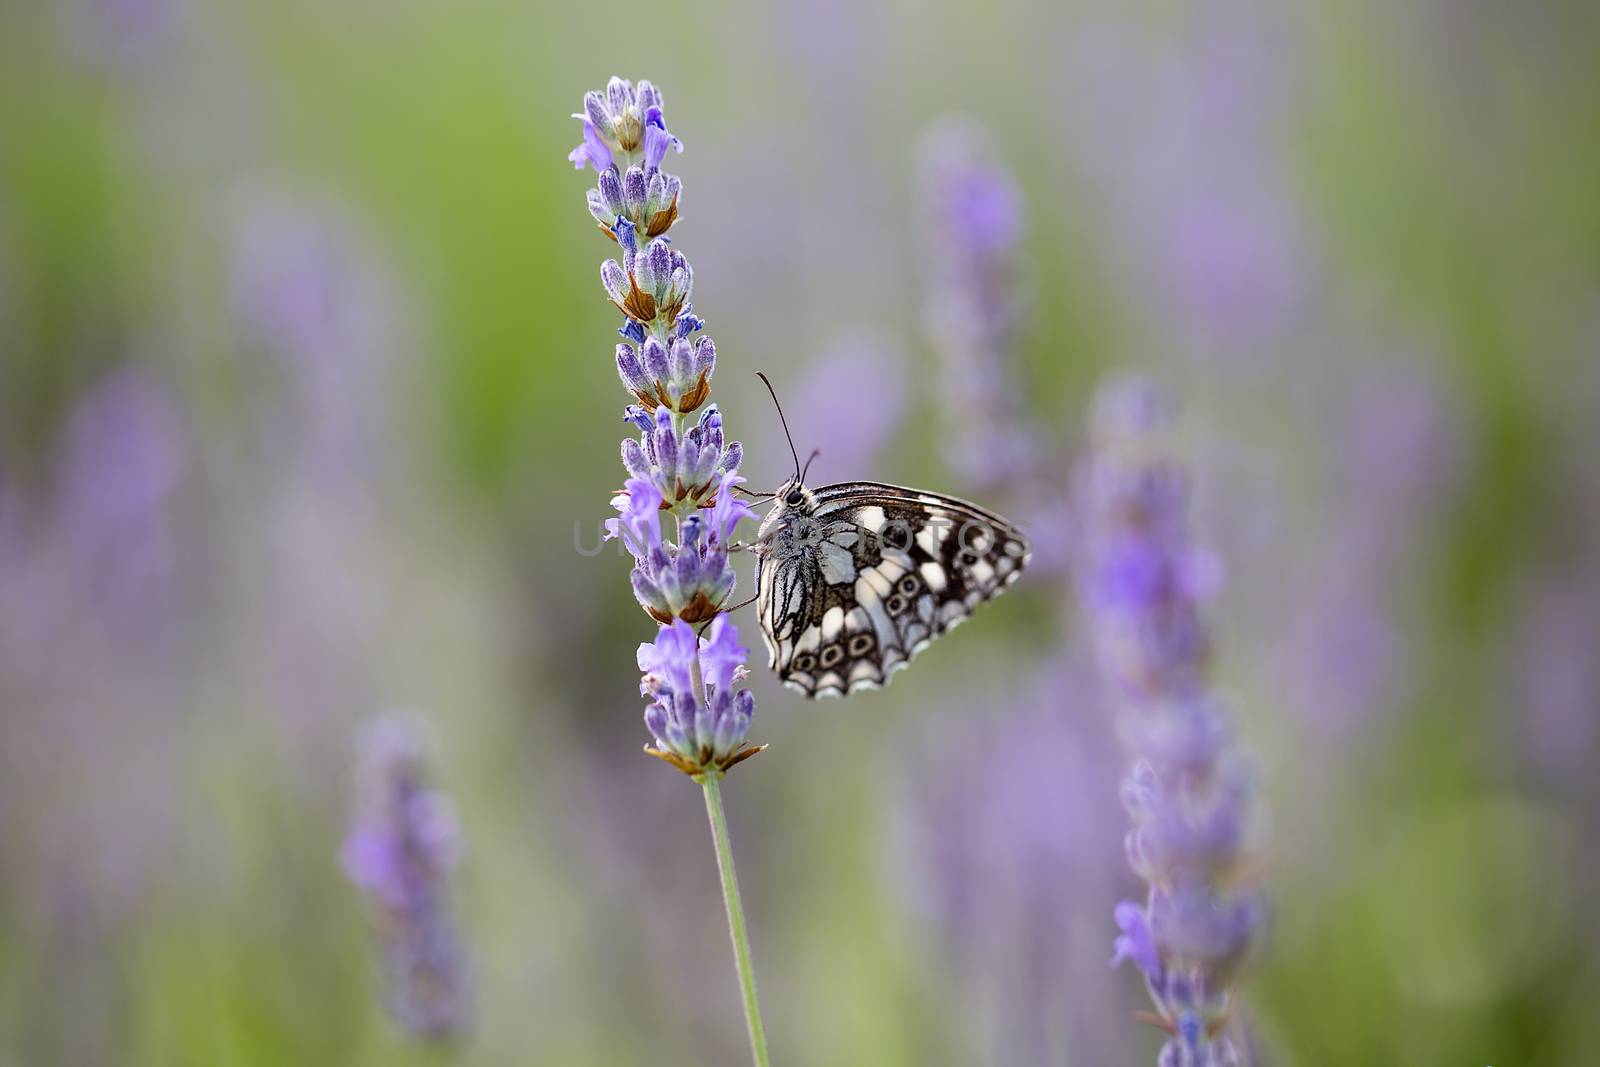 The Marbled White (Melanargia galathea) butterfly on lavander flower, macro photography, copy space, background